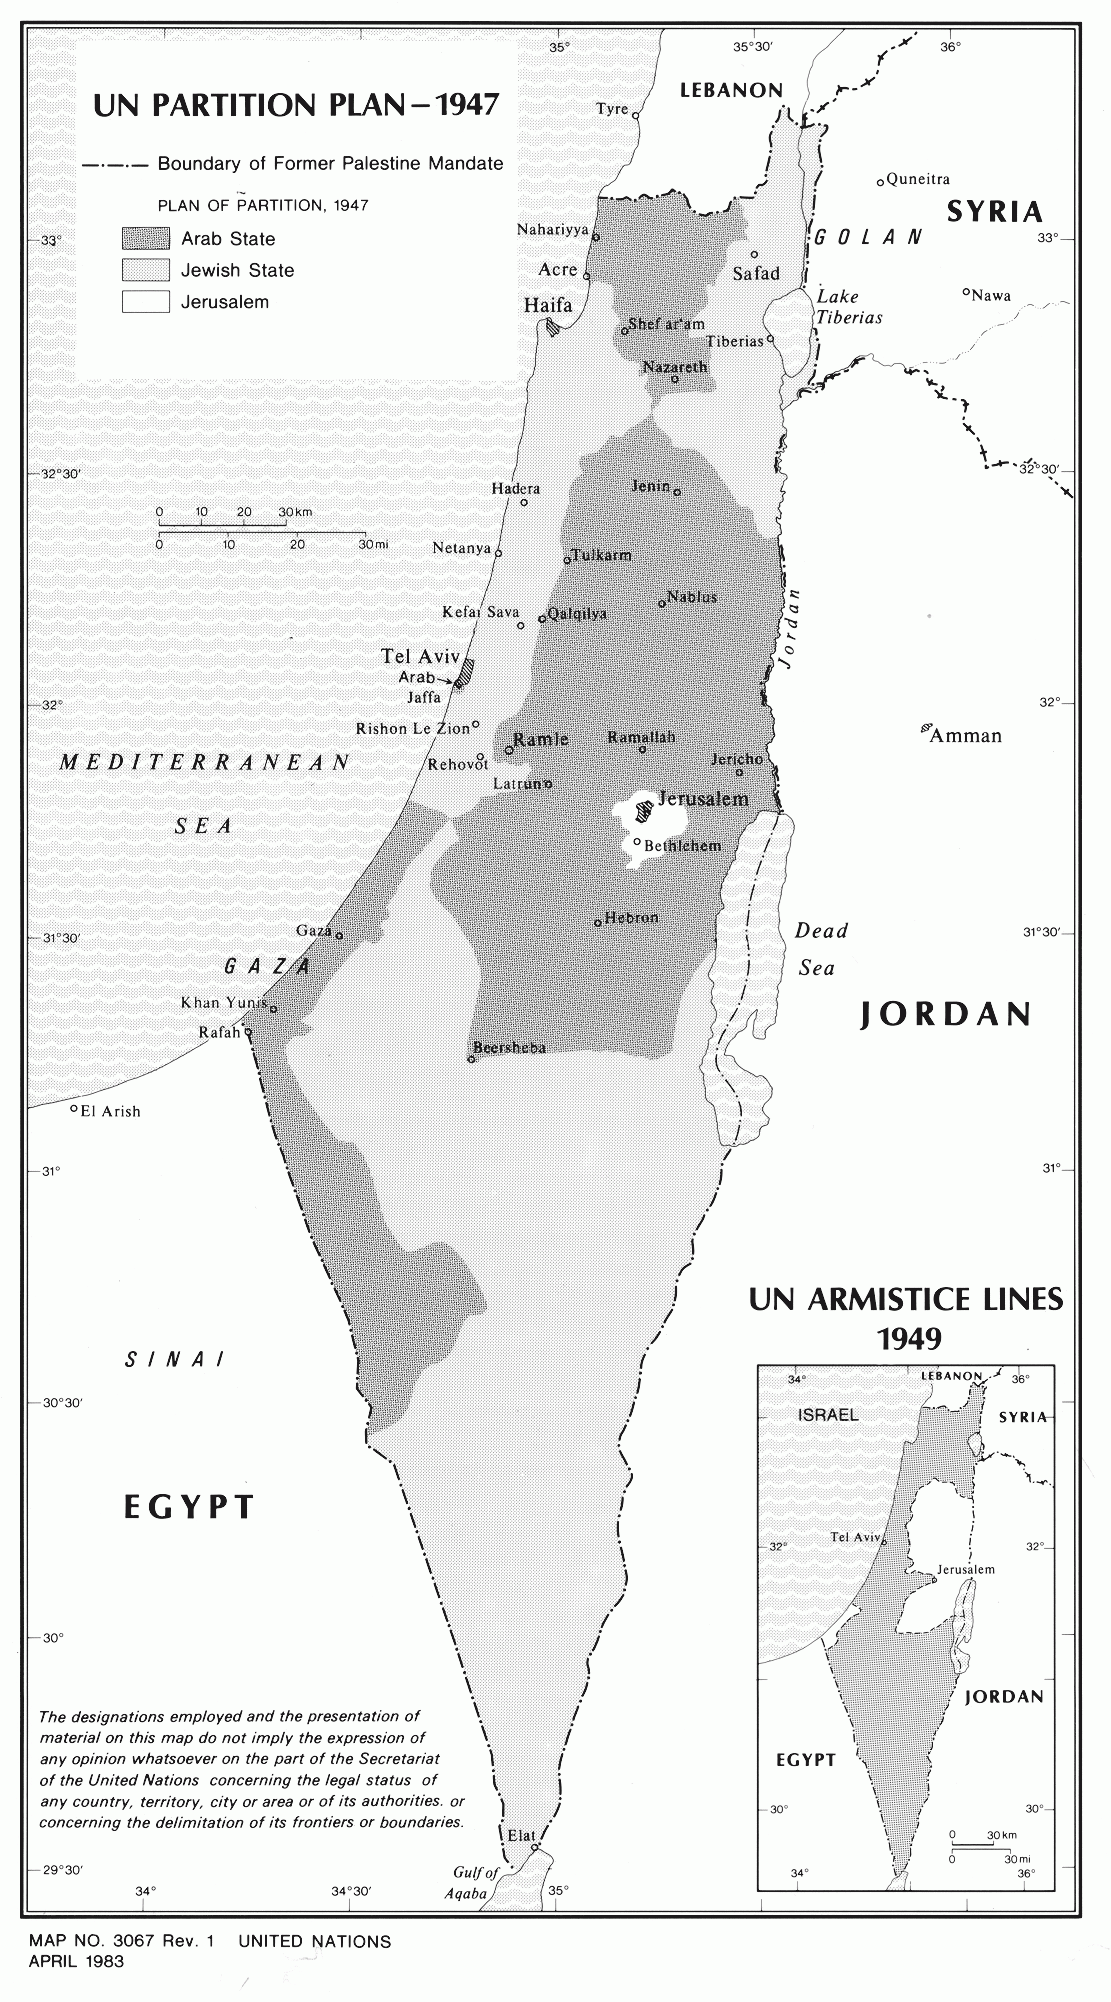 United Nations partition plan of 1947 - Map - Question of Palestine